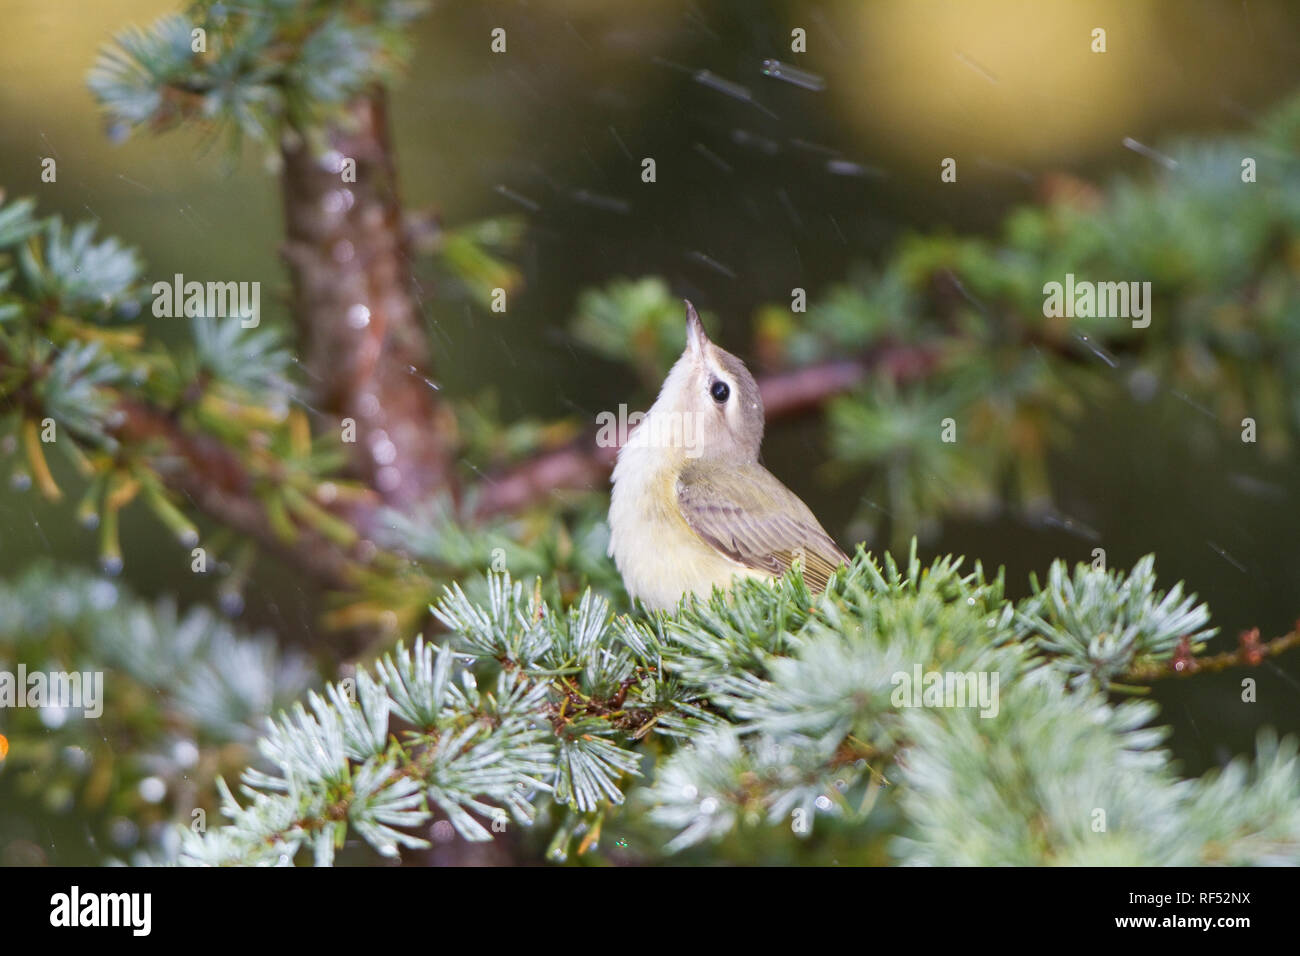 01454-00202 Warbling Vireo (Vireo gilvus) bathing in mist, Marion Co., IL Stock Photo